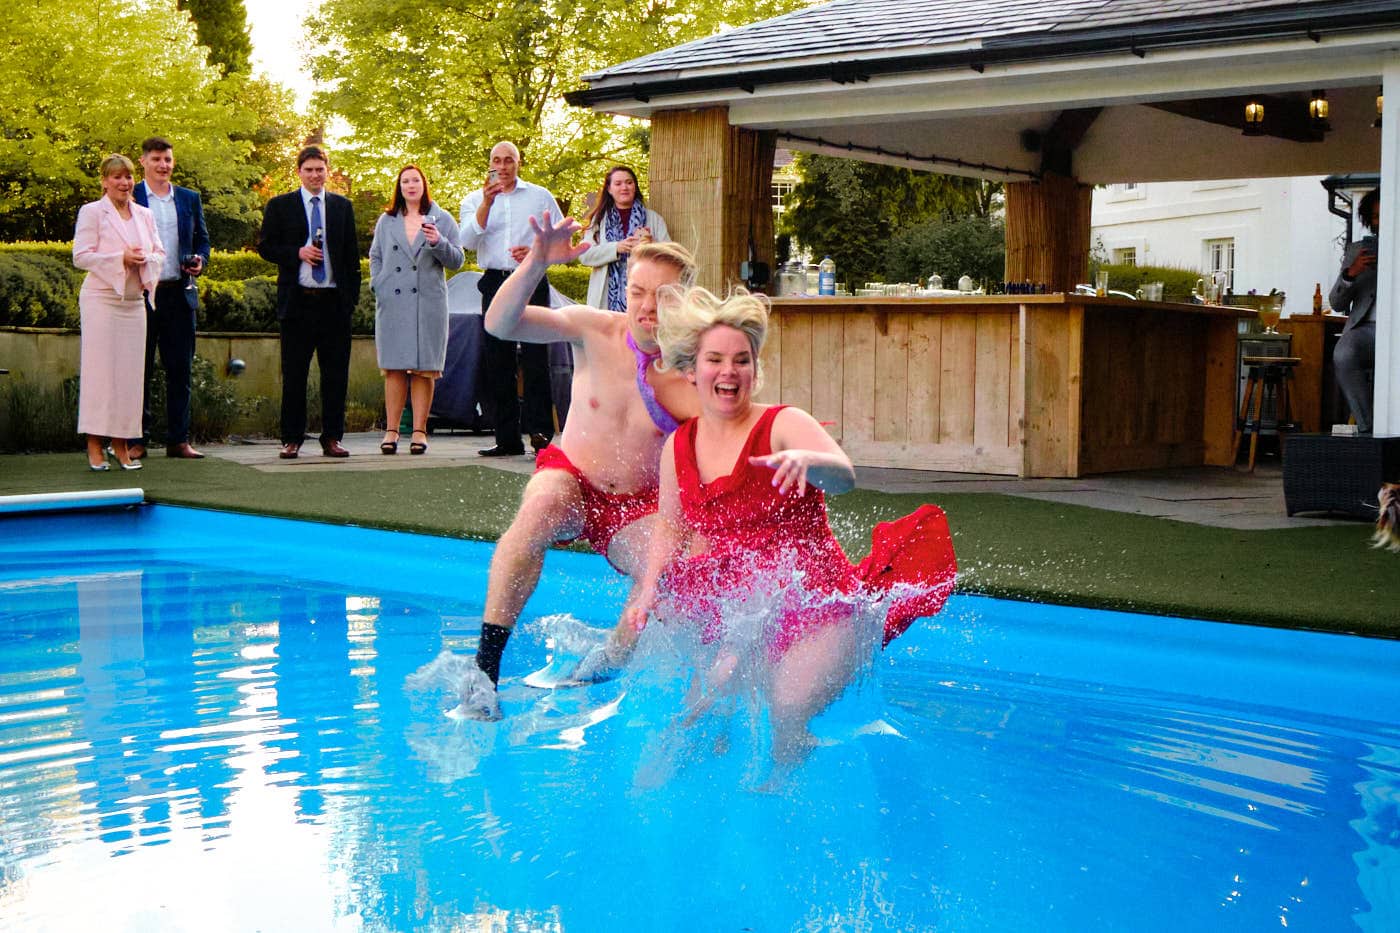 Bride and groom jumping into pool at the end of their wedding day